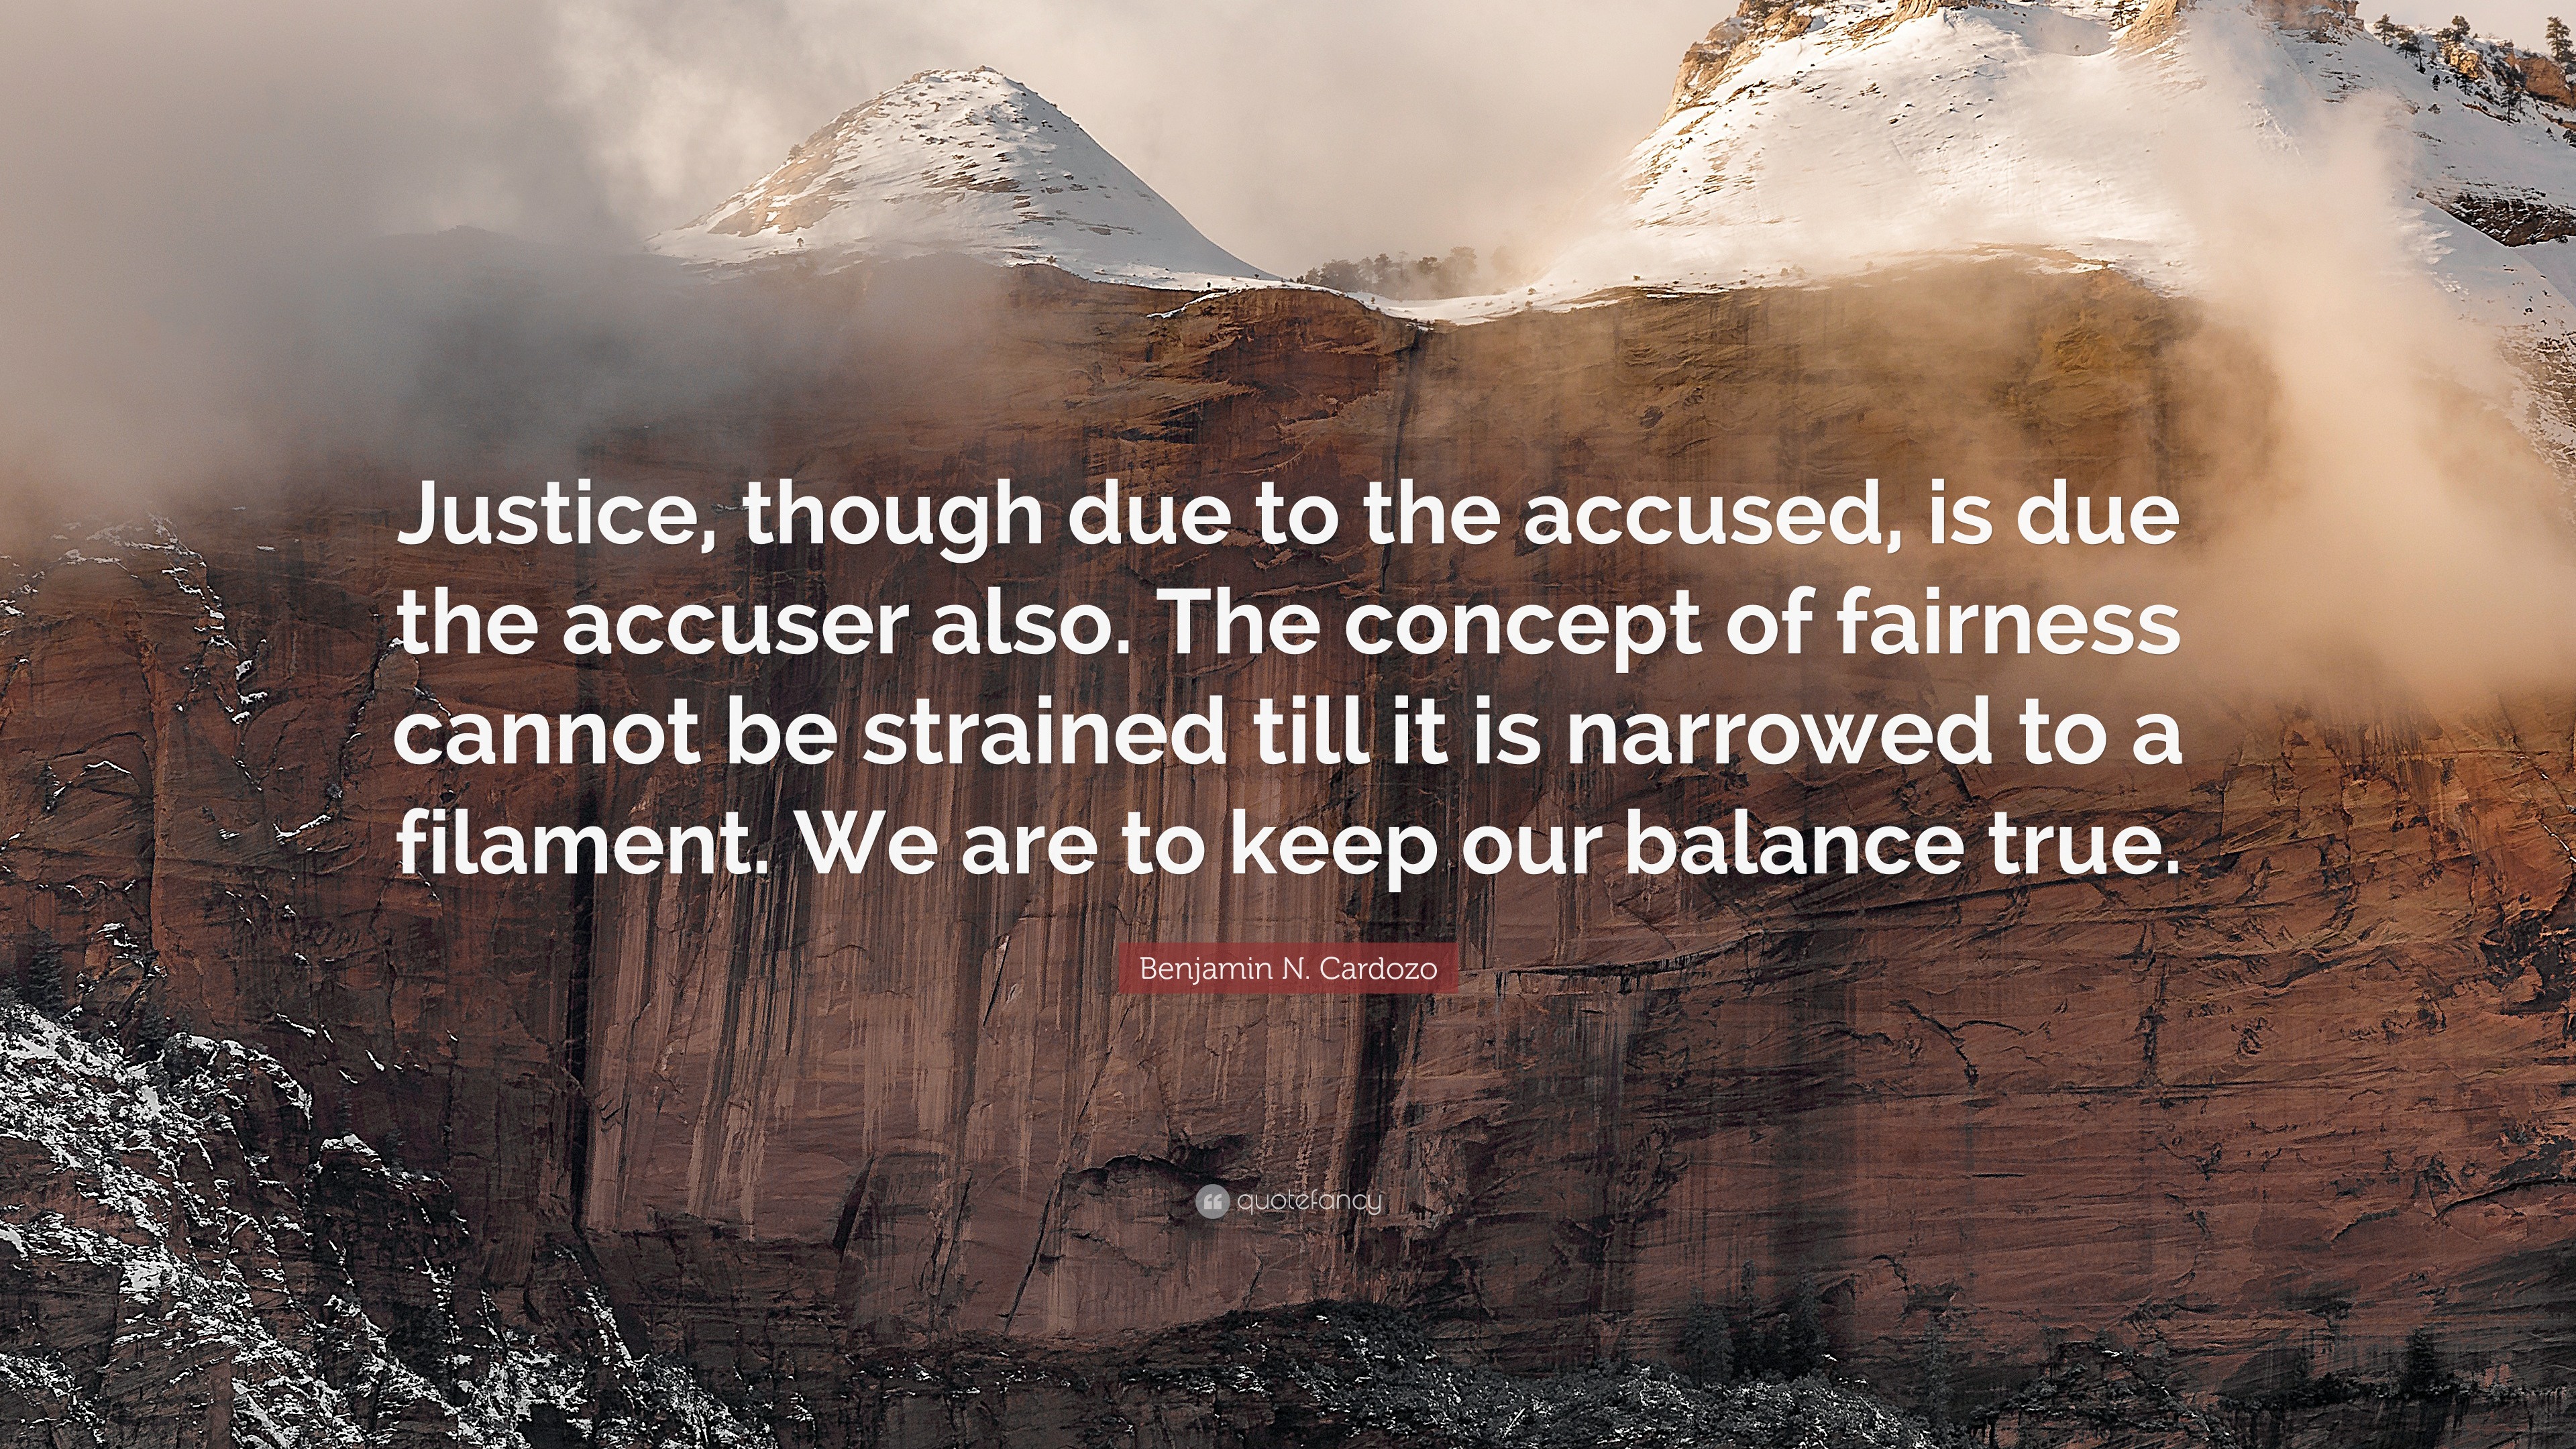 Benjamin N. Cardozo Quote: “Justice, though due to the accused, is due